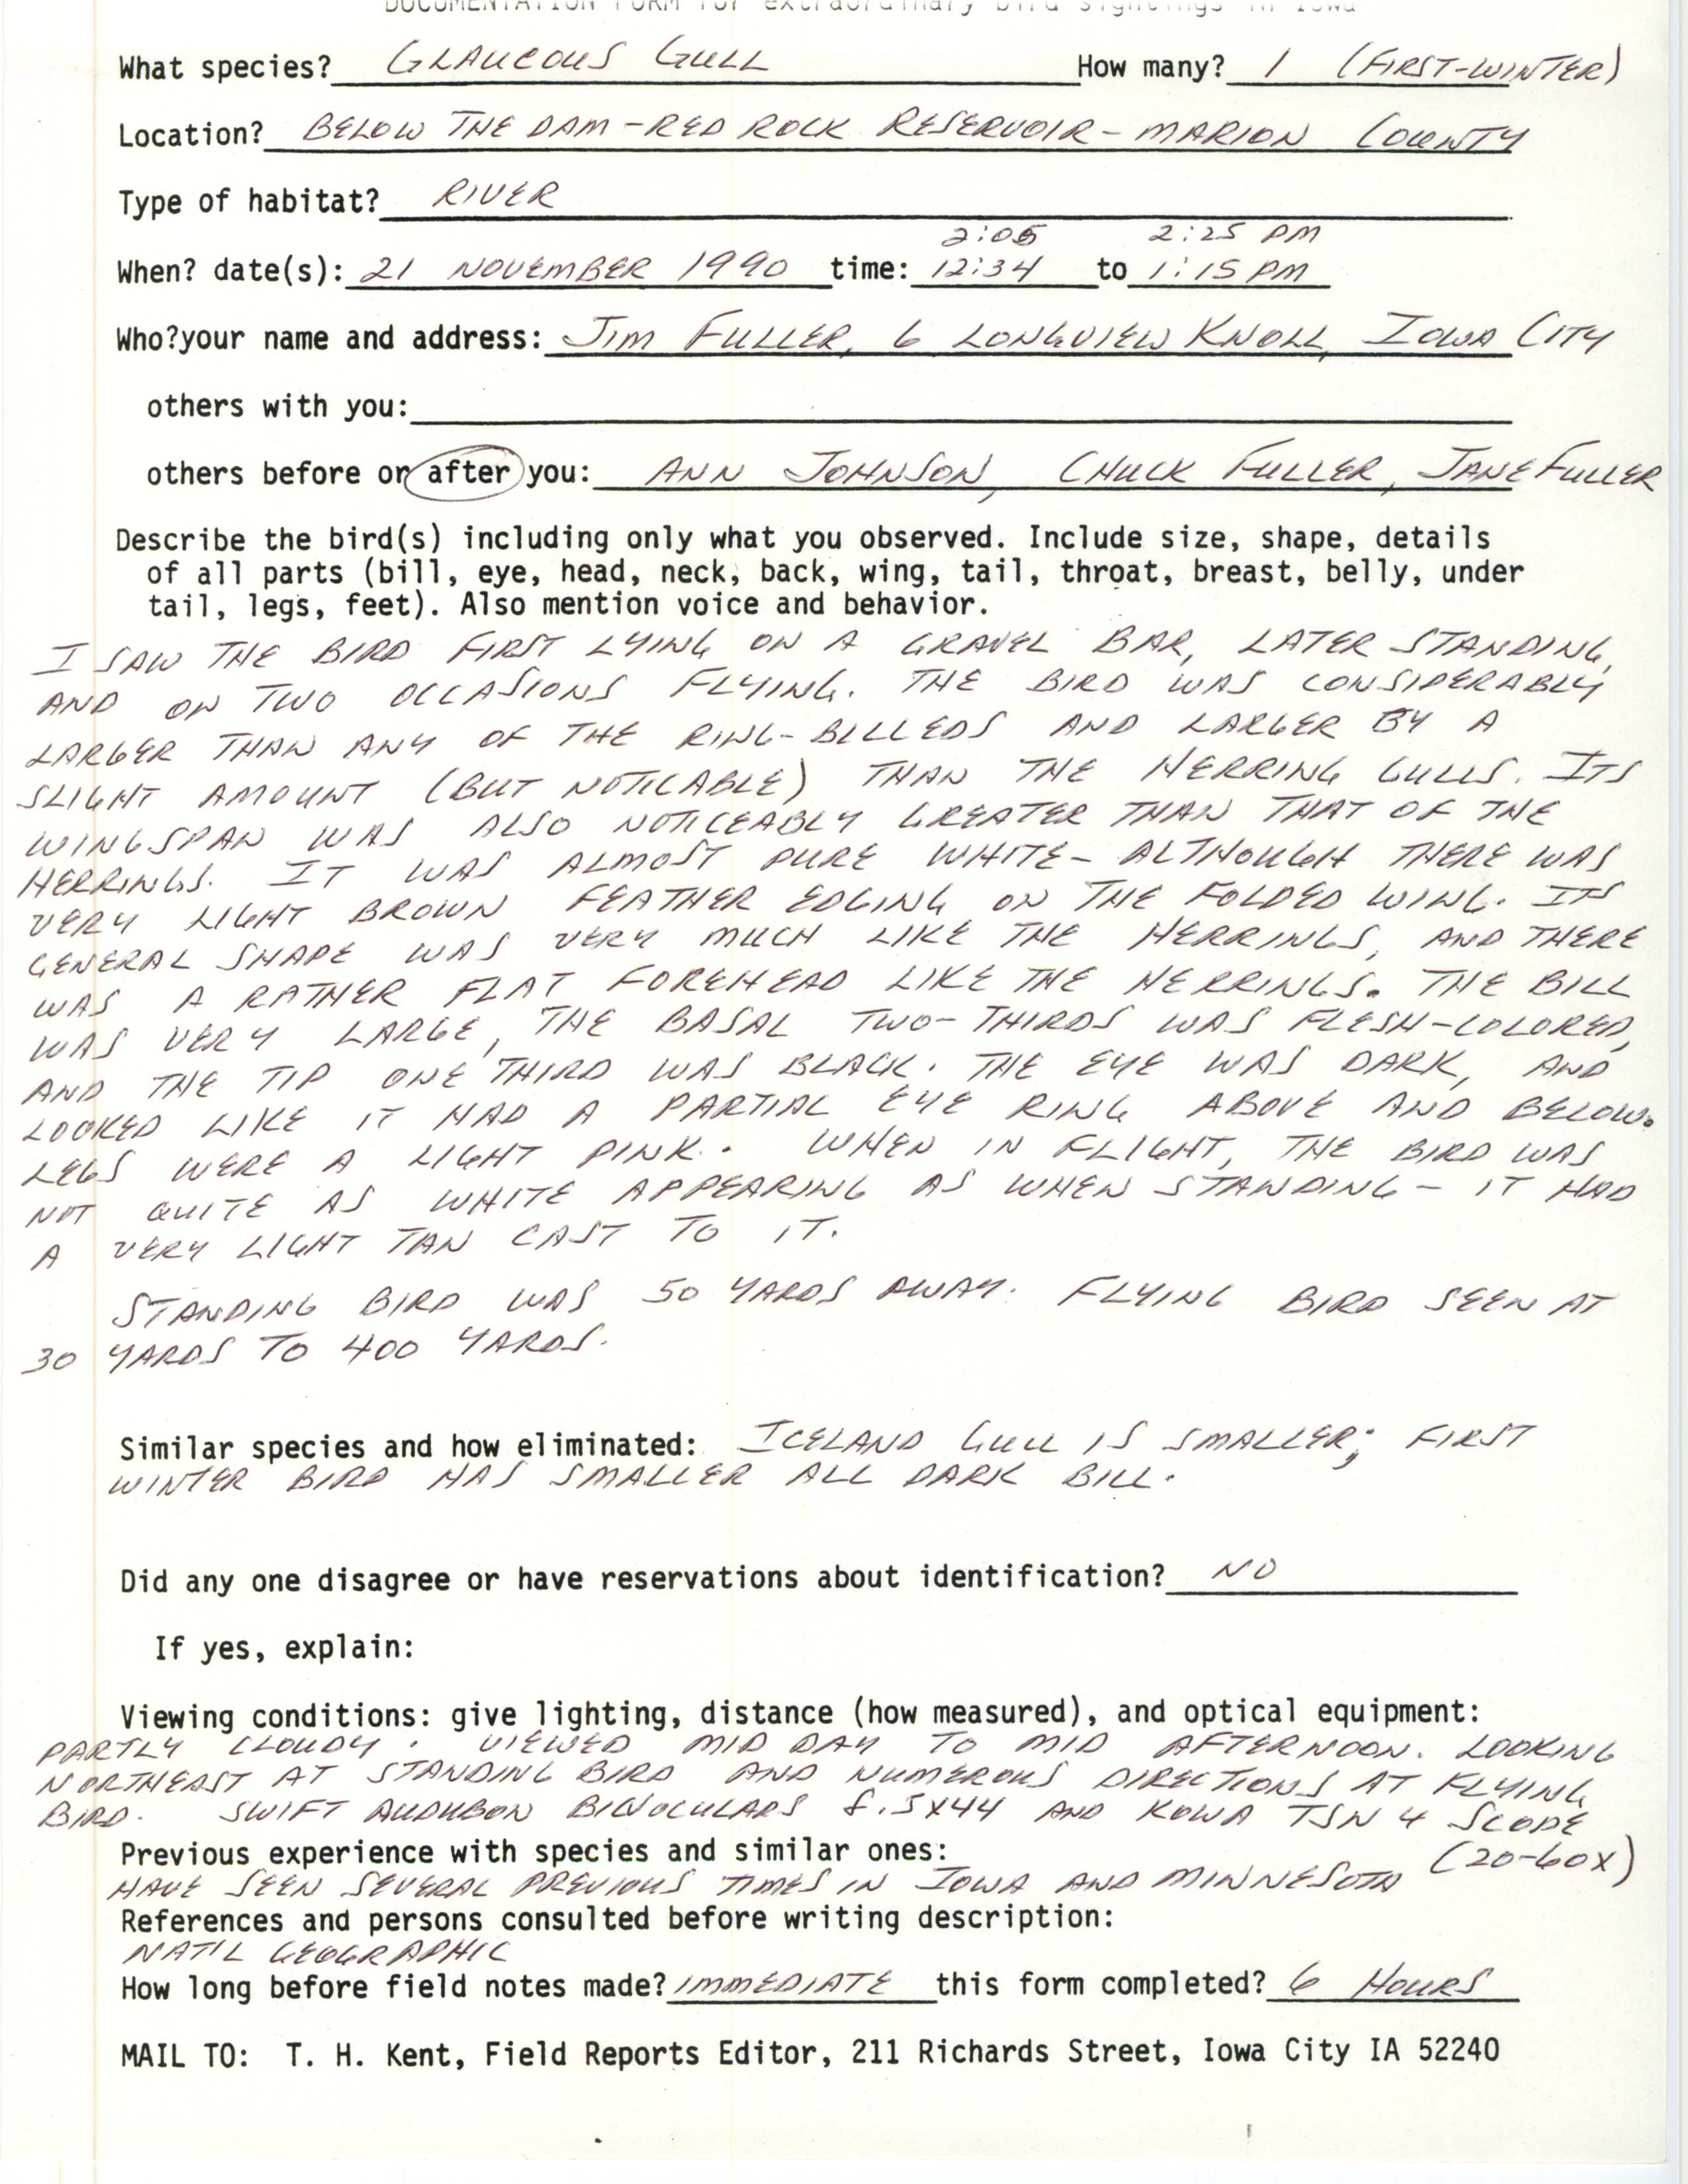 Rare bird documentation form for Glaucous Gull at Red Rock Dam, 1990